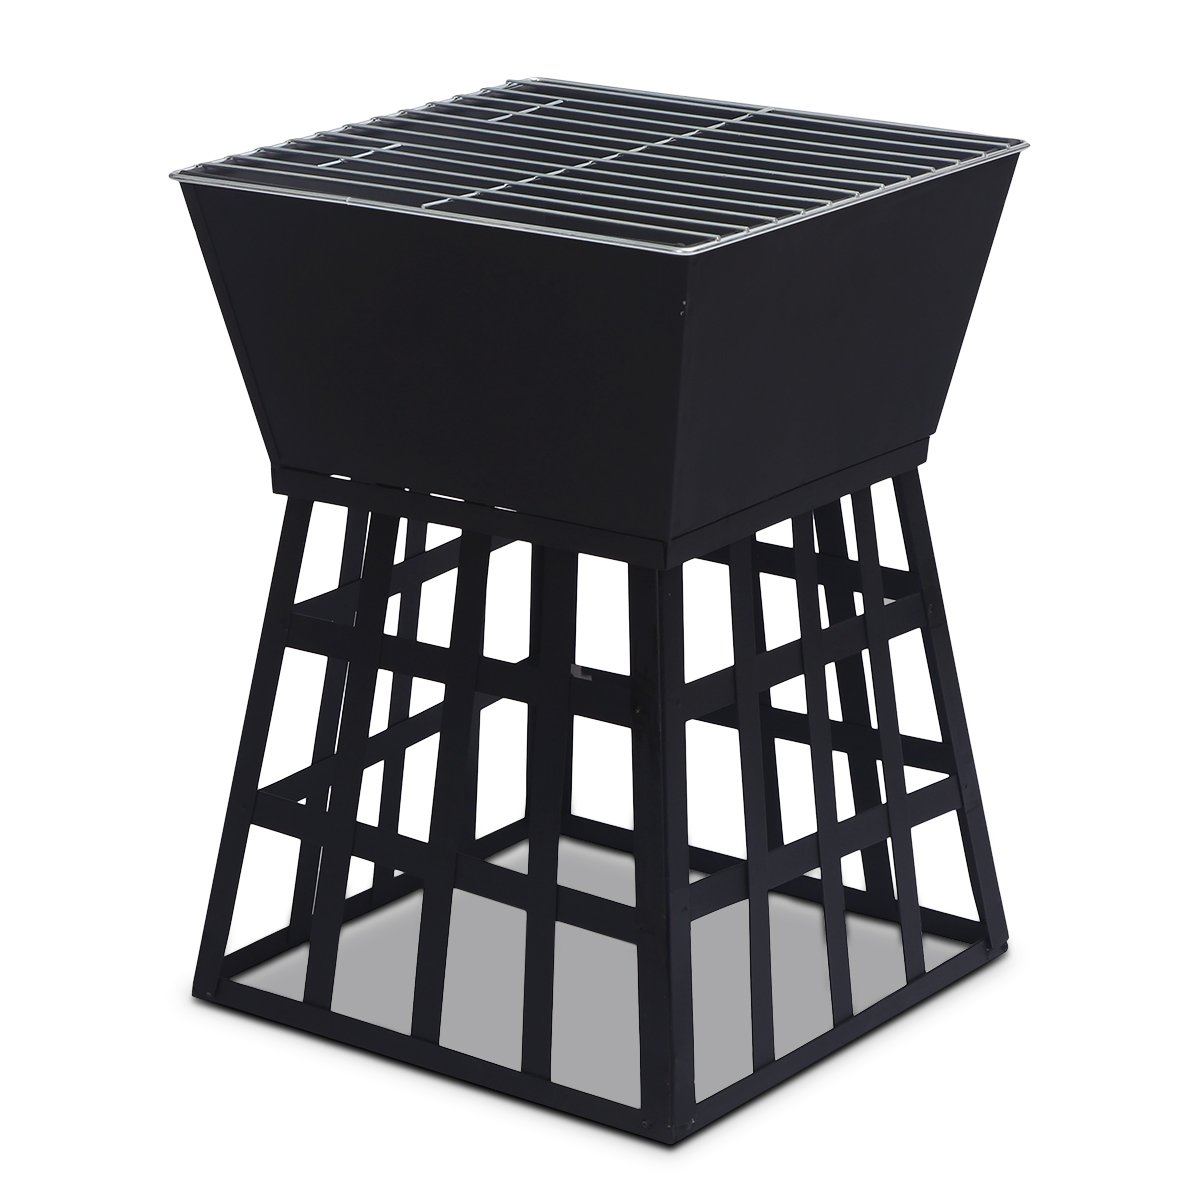 Wallaroo Outdoor Fire Pit for BBQ, Grilling, Cooking, Camping- Portable Brazier with Reversible 1